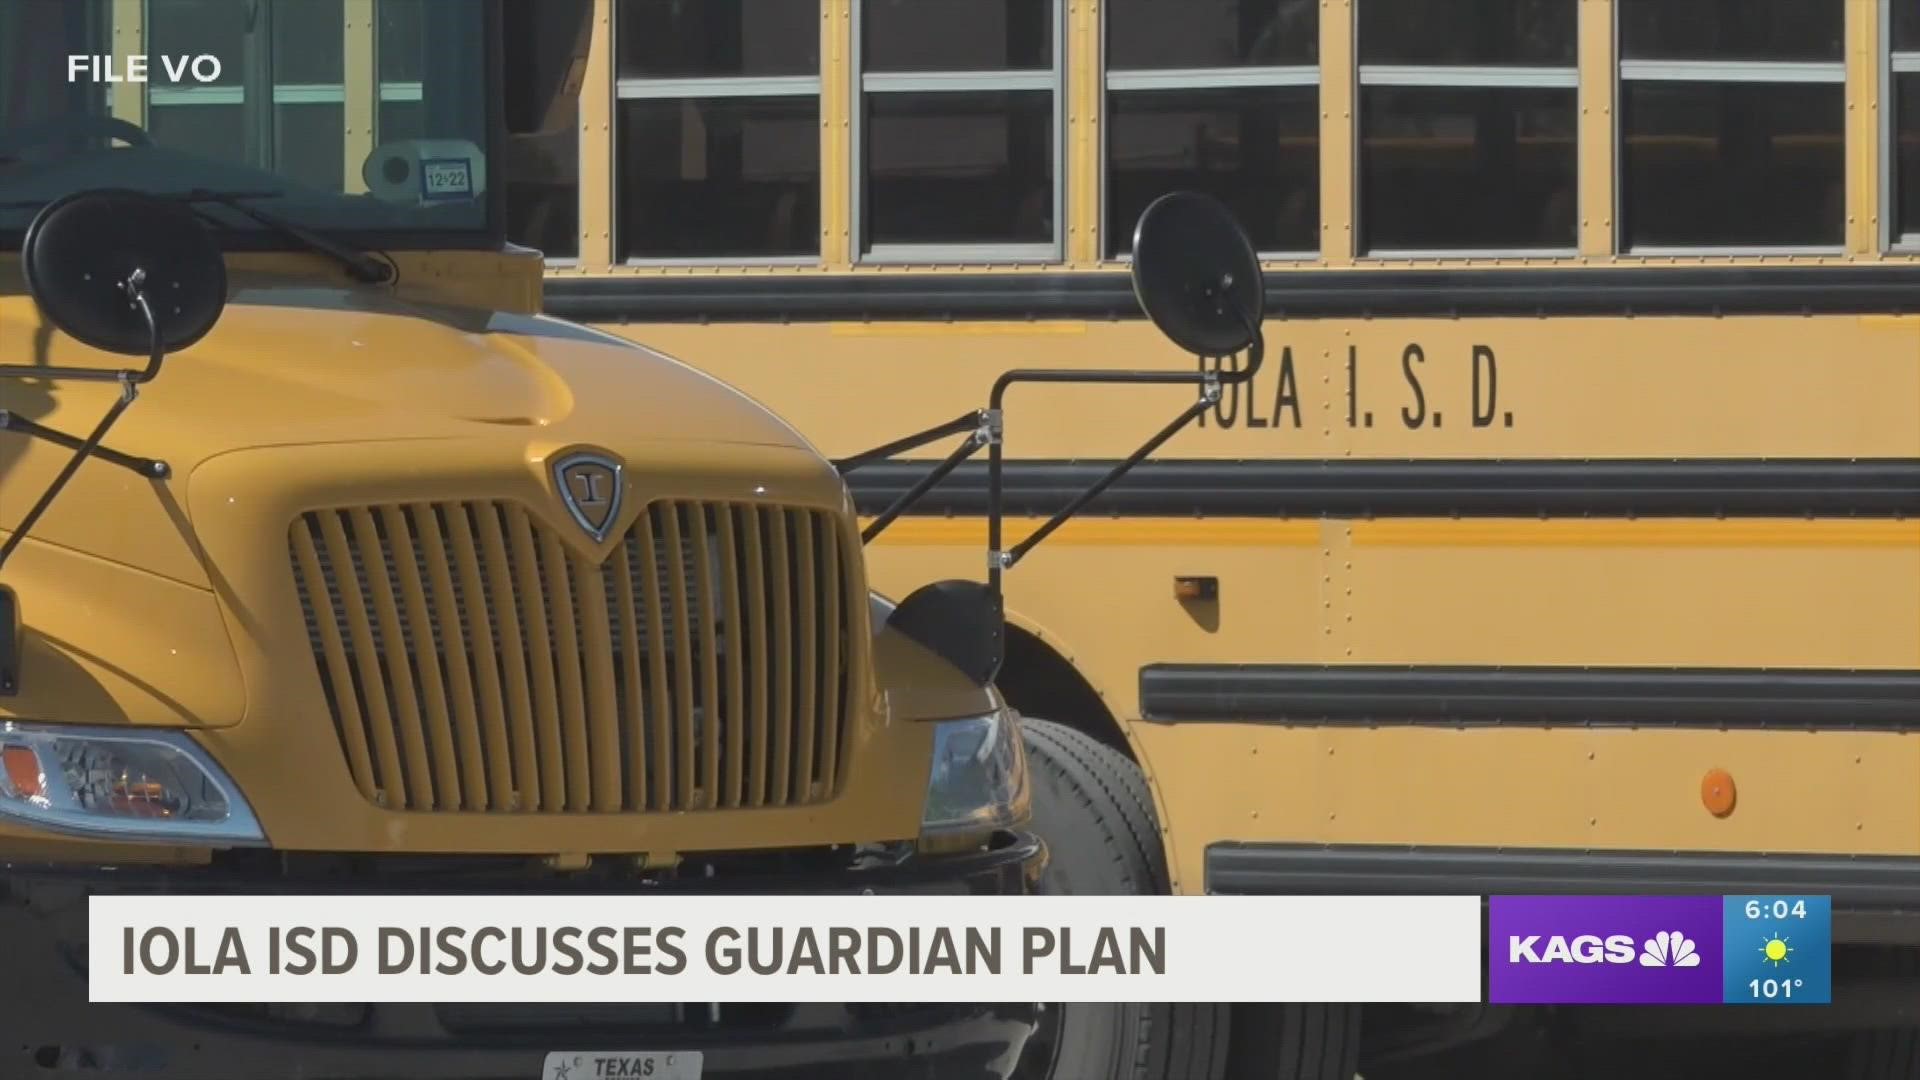 Jeff Dyer, Iola ISD Superintendent, said that this school year will mark the fifth year they've had the Guardian Plan in place.